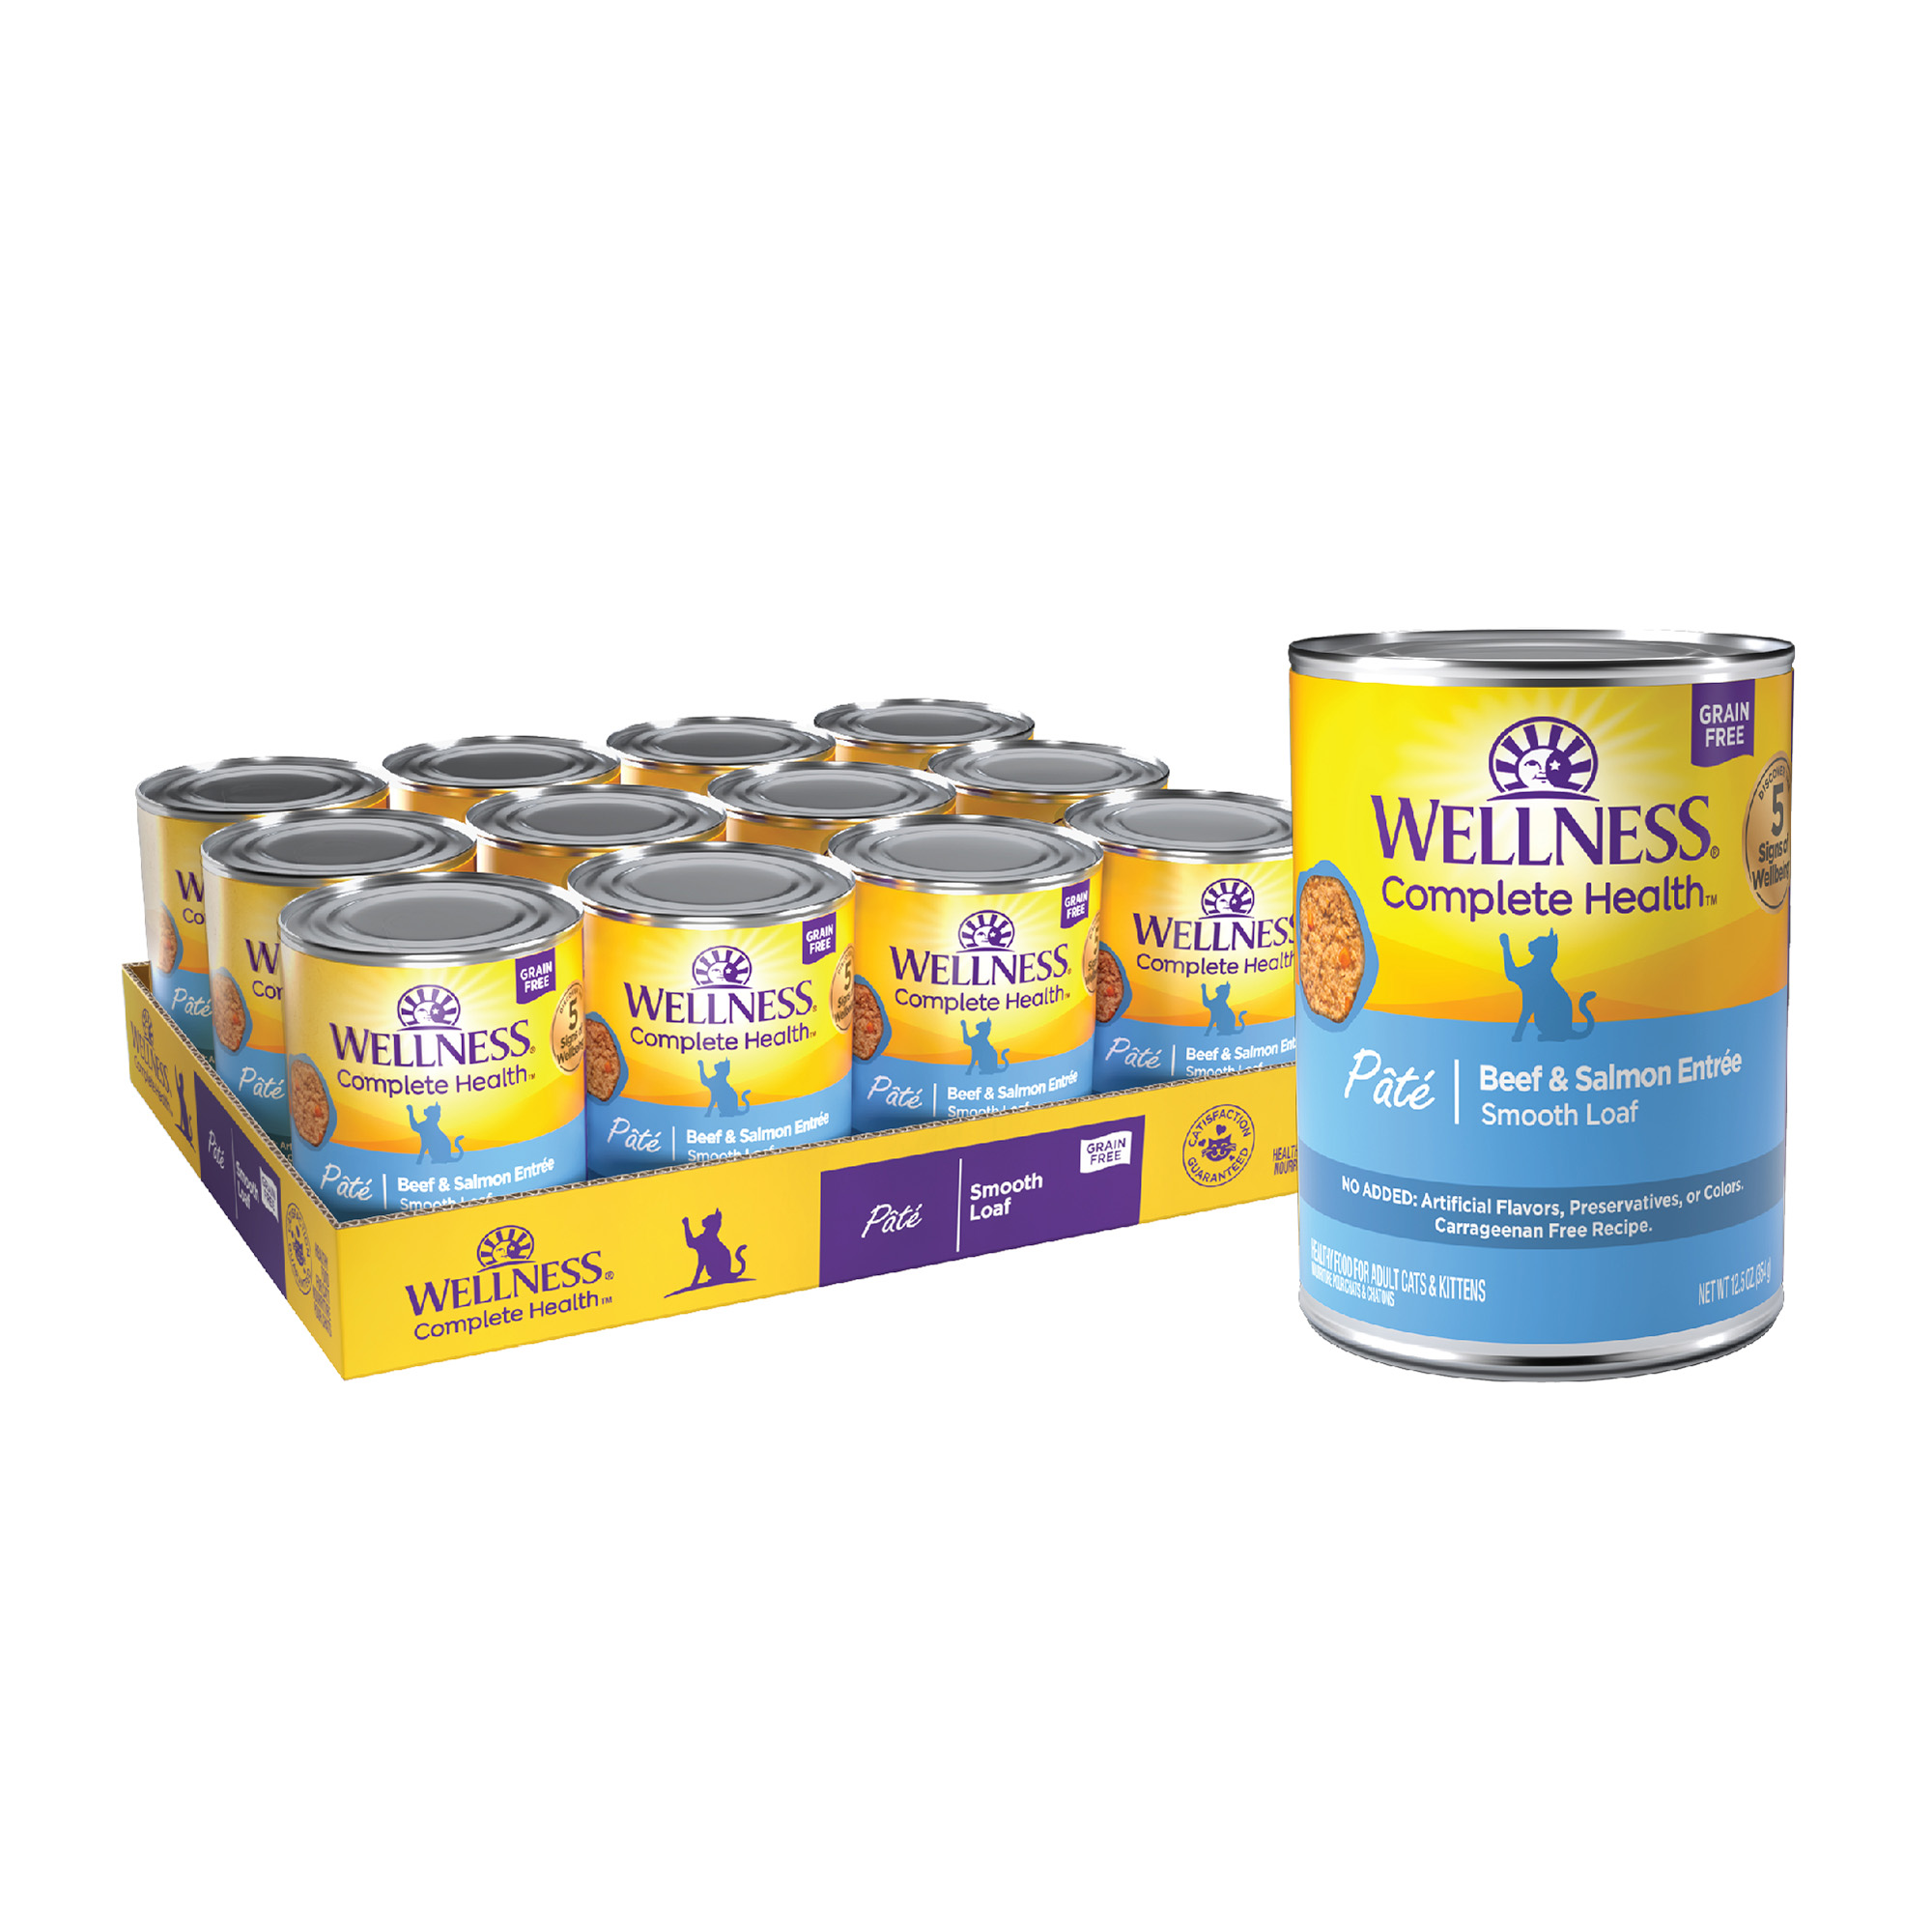 Wellness Complete Health Natural Grain Free Wet Canned Cat Food, Beef & Salmon Pate, 12.5-Ounce Can (Pack of 12) - image 1 of 11